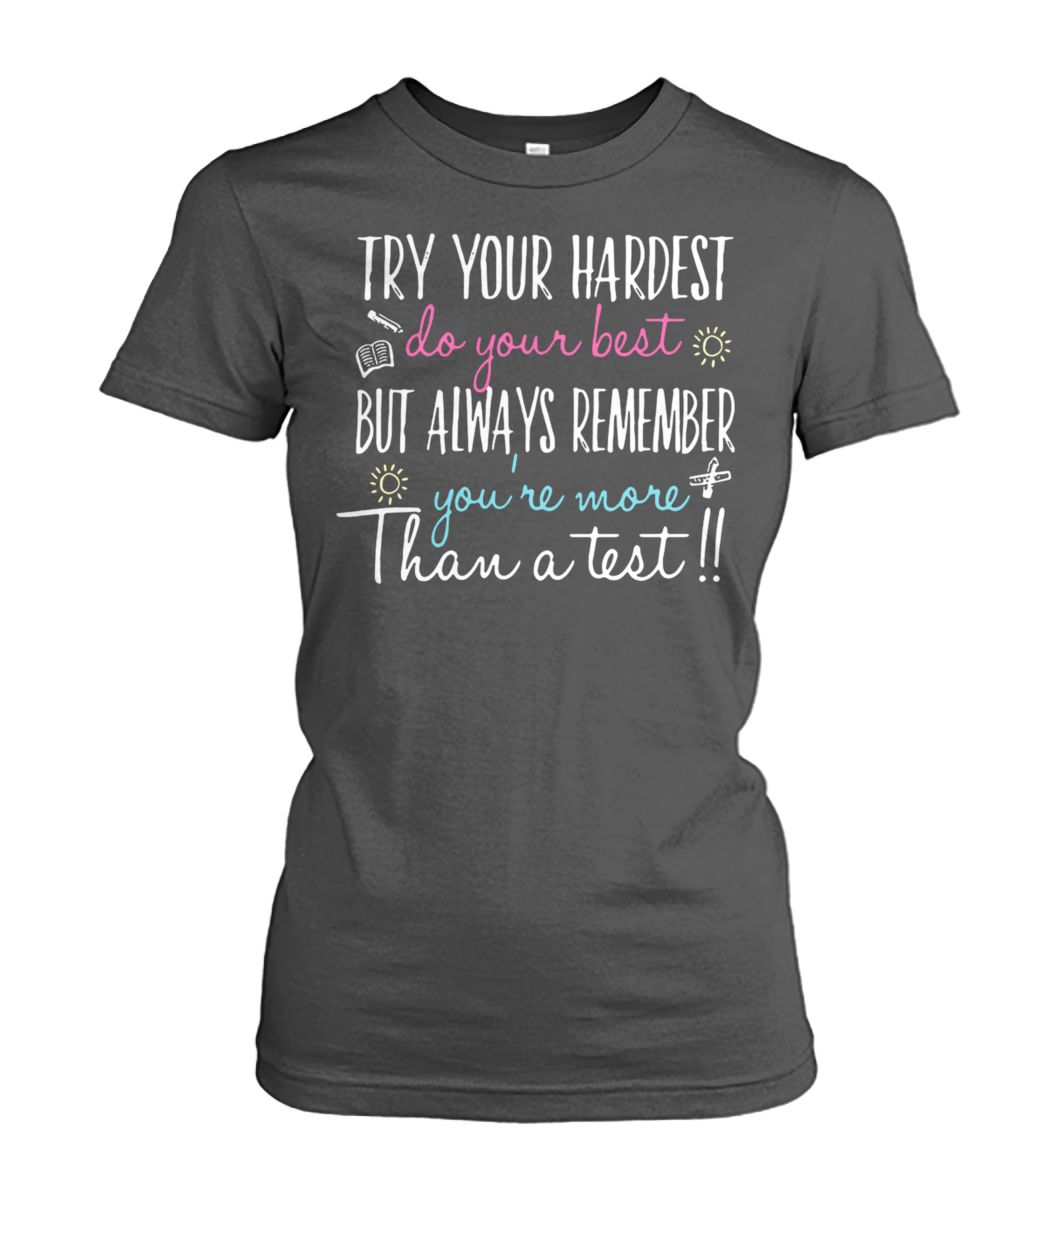 Try your hardest do your best but always remember you're more than a test women's crew tee